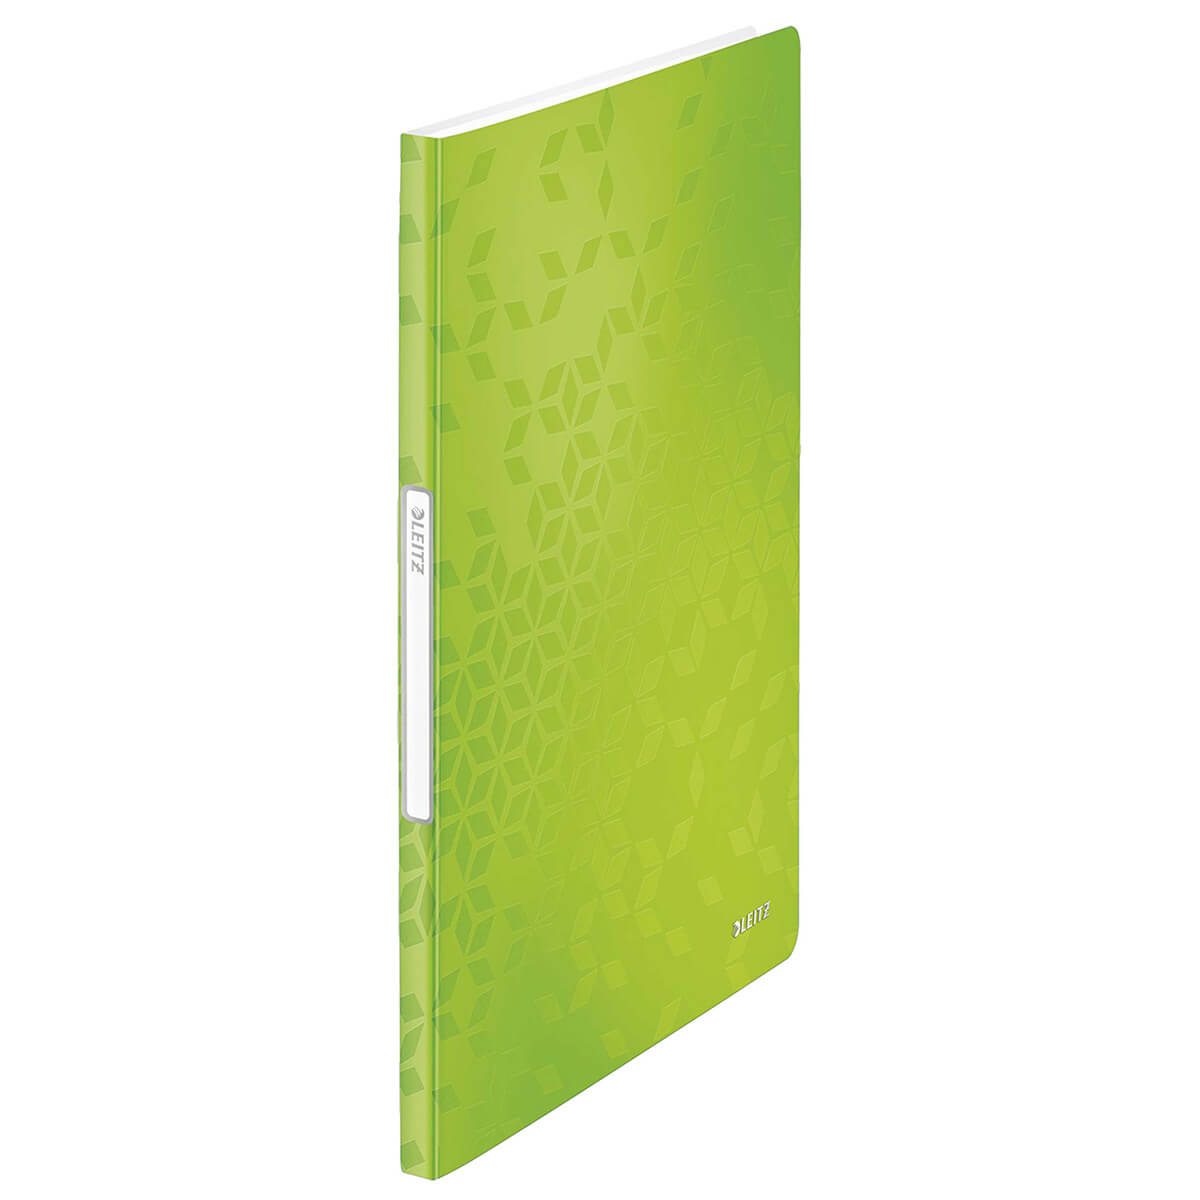 Leitz View book wow a4 pp 20 covers green